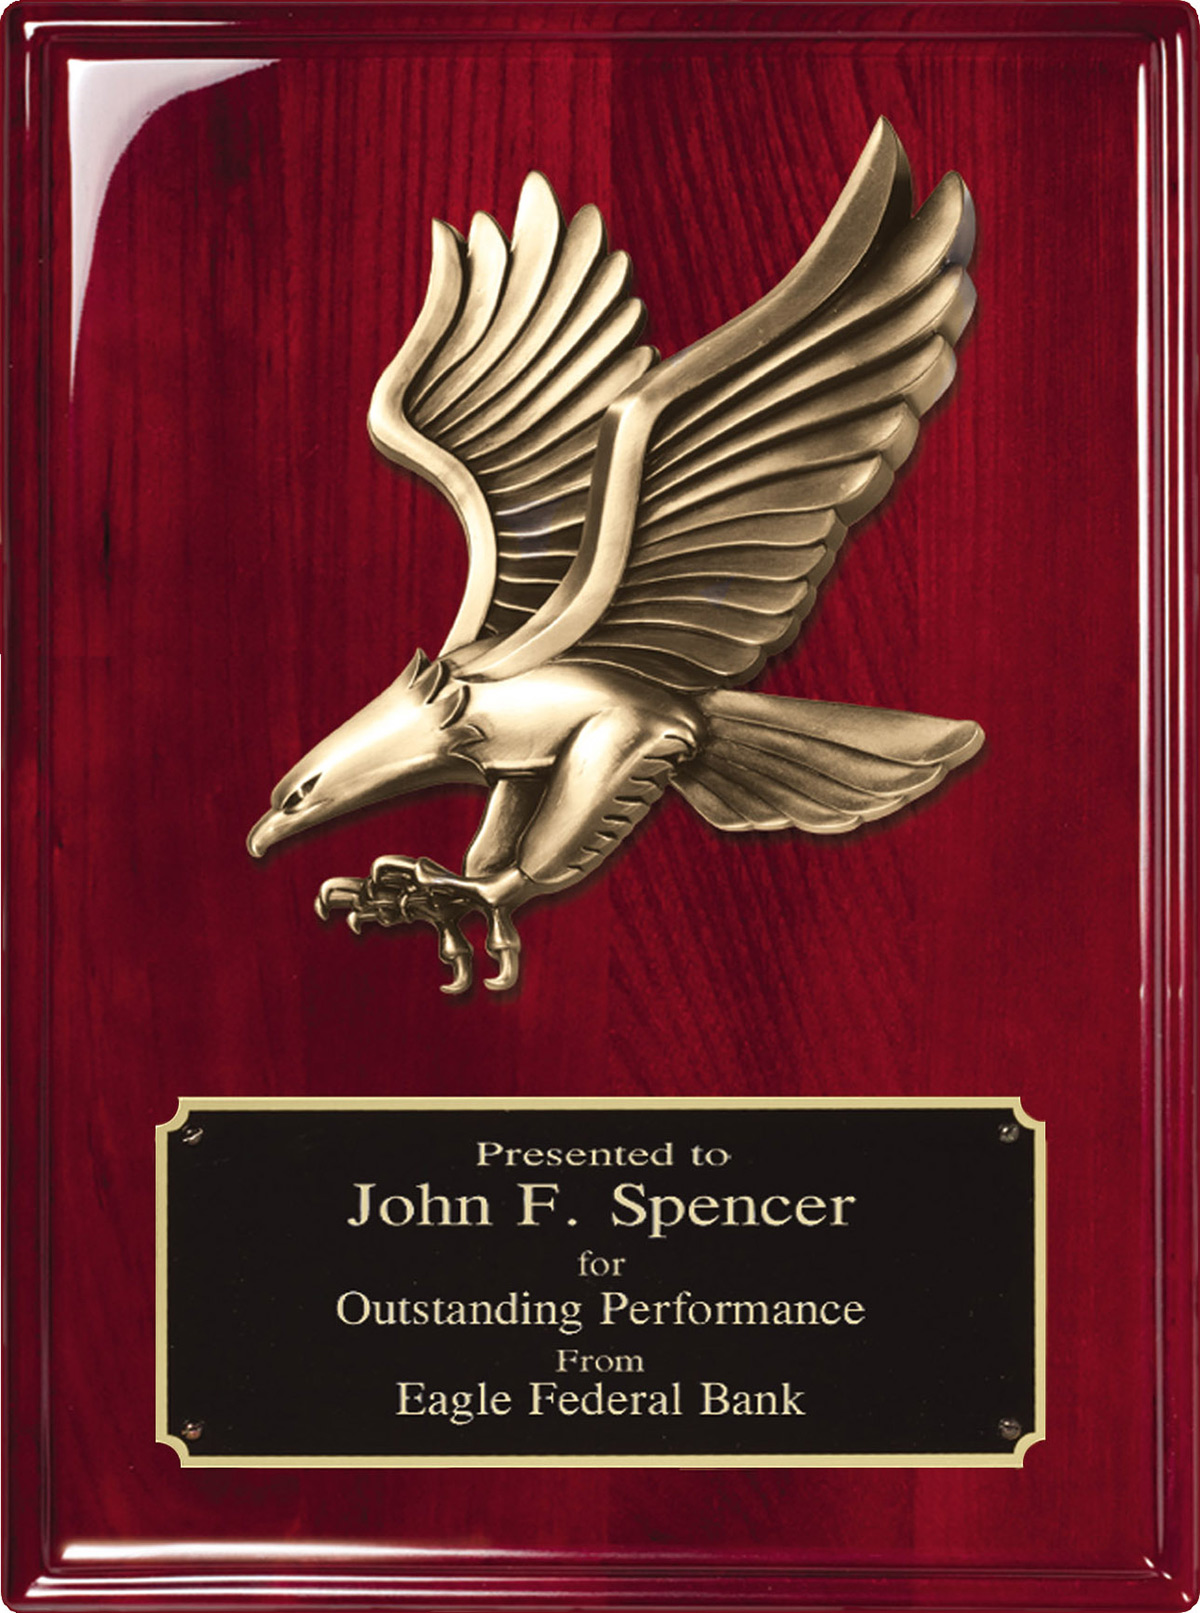 Rosewood Piano Finish Plaque with Eagle Casting- 9x12 inch